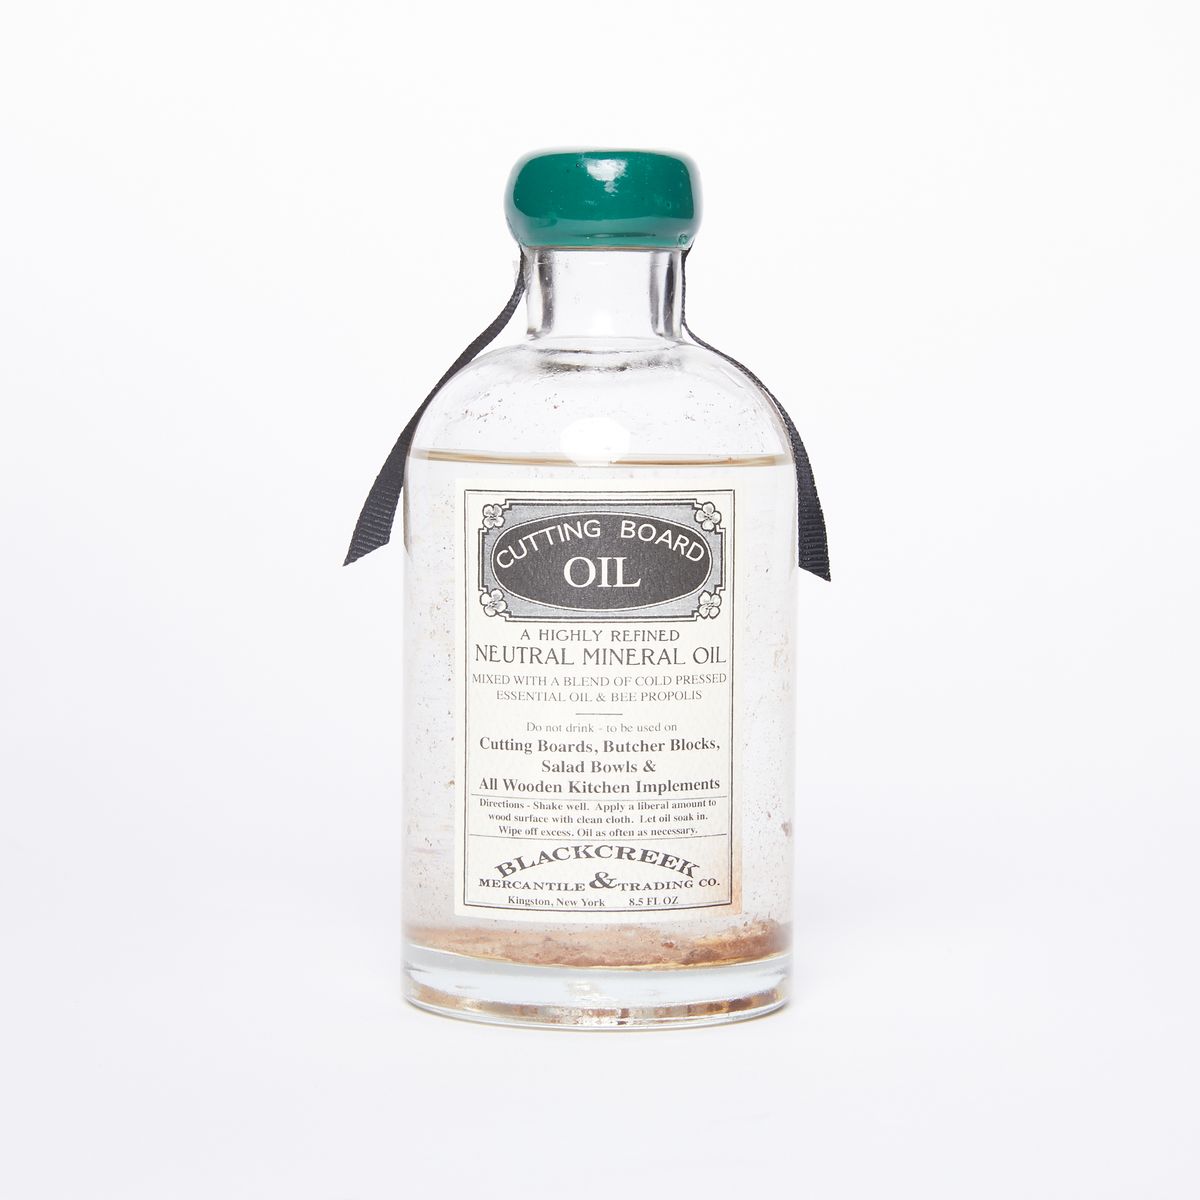 Clear bottle full of liquid with an old-timey label that reads "Cutting Board Oil" with green wax covering the top